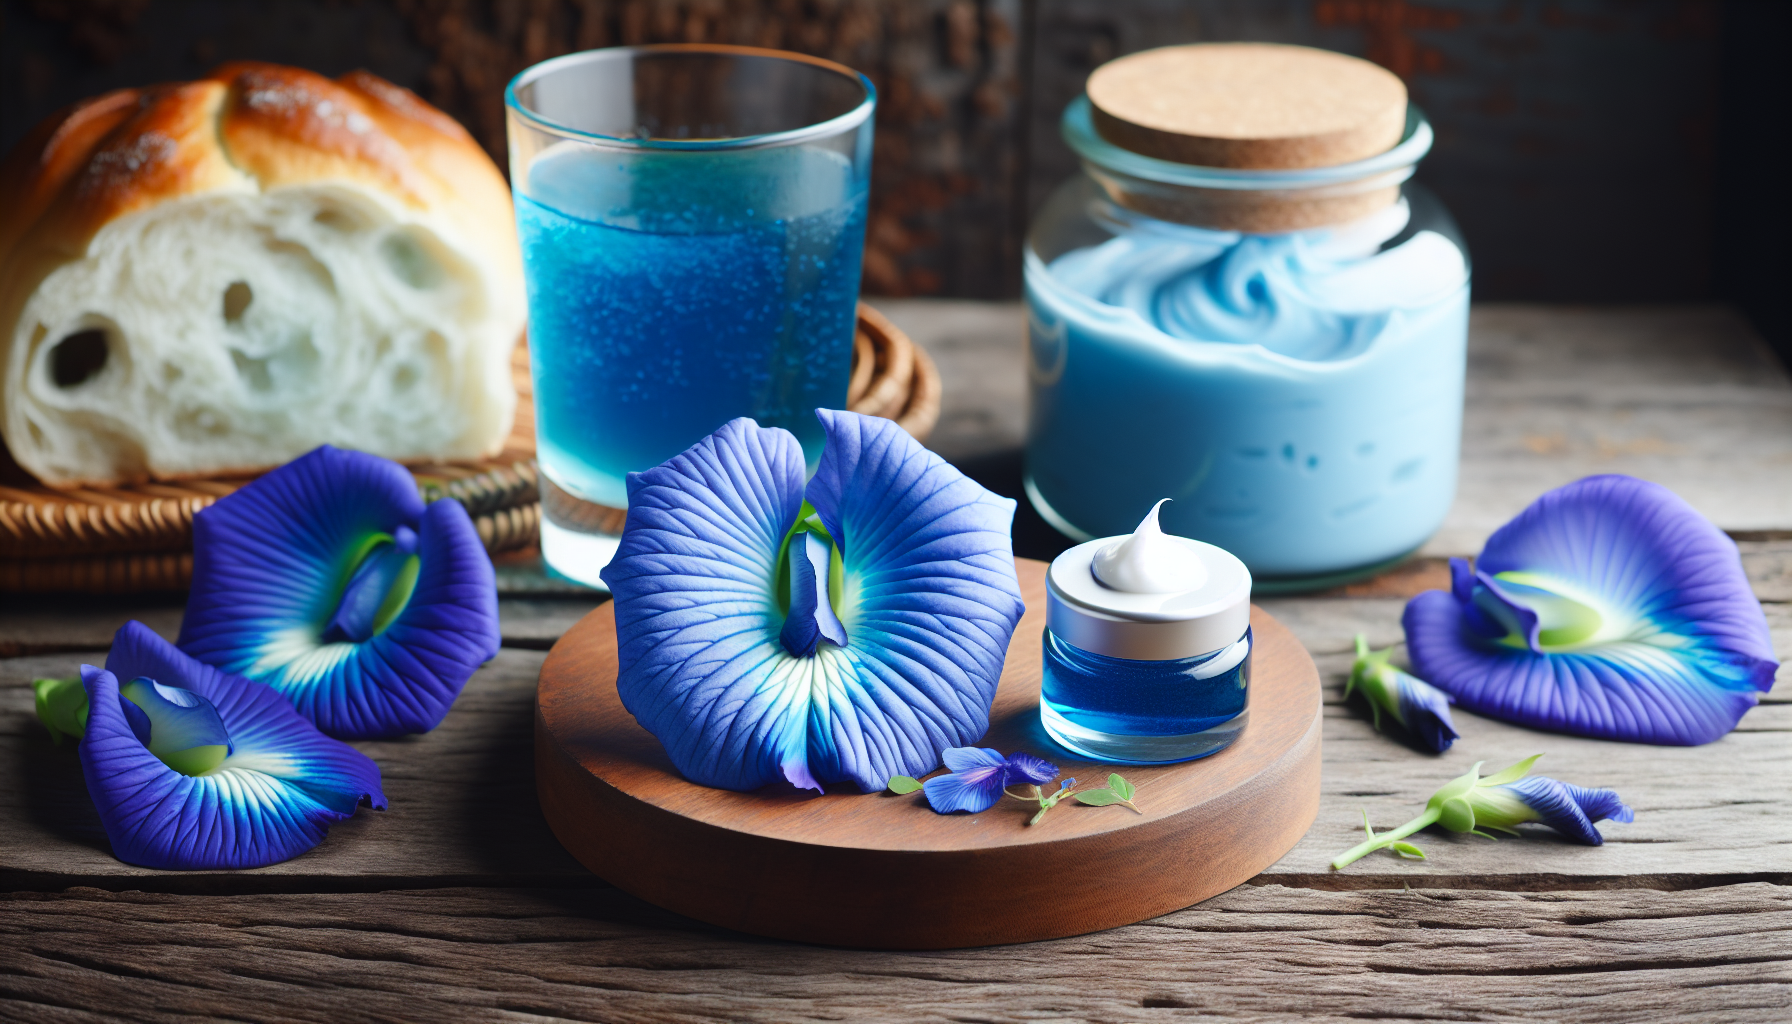 Culinary and cosmetic uses of butterfly pea flowers